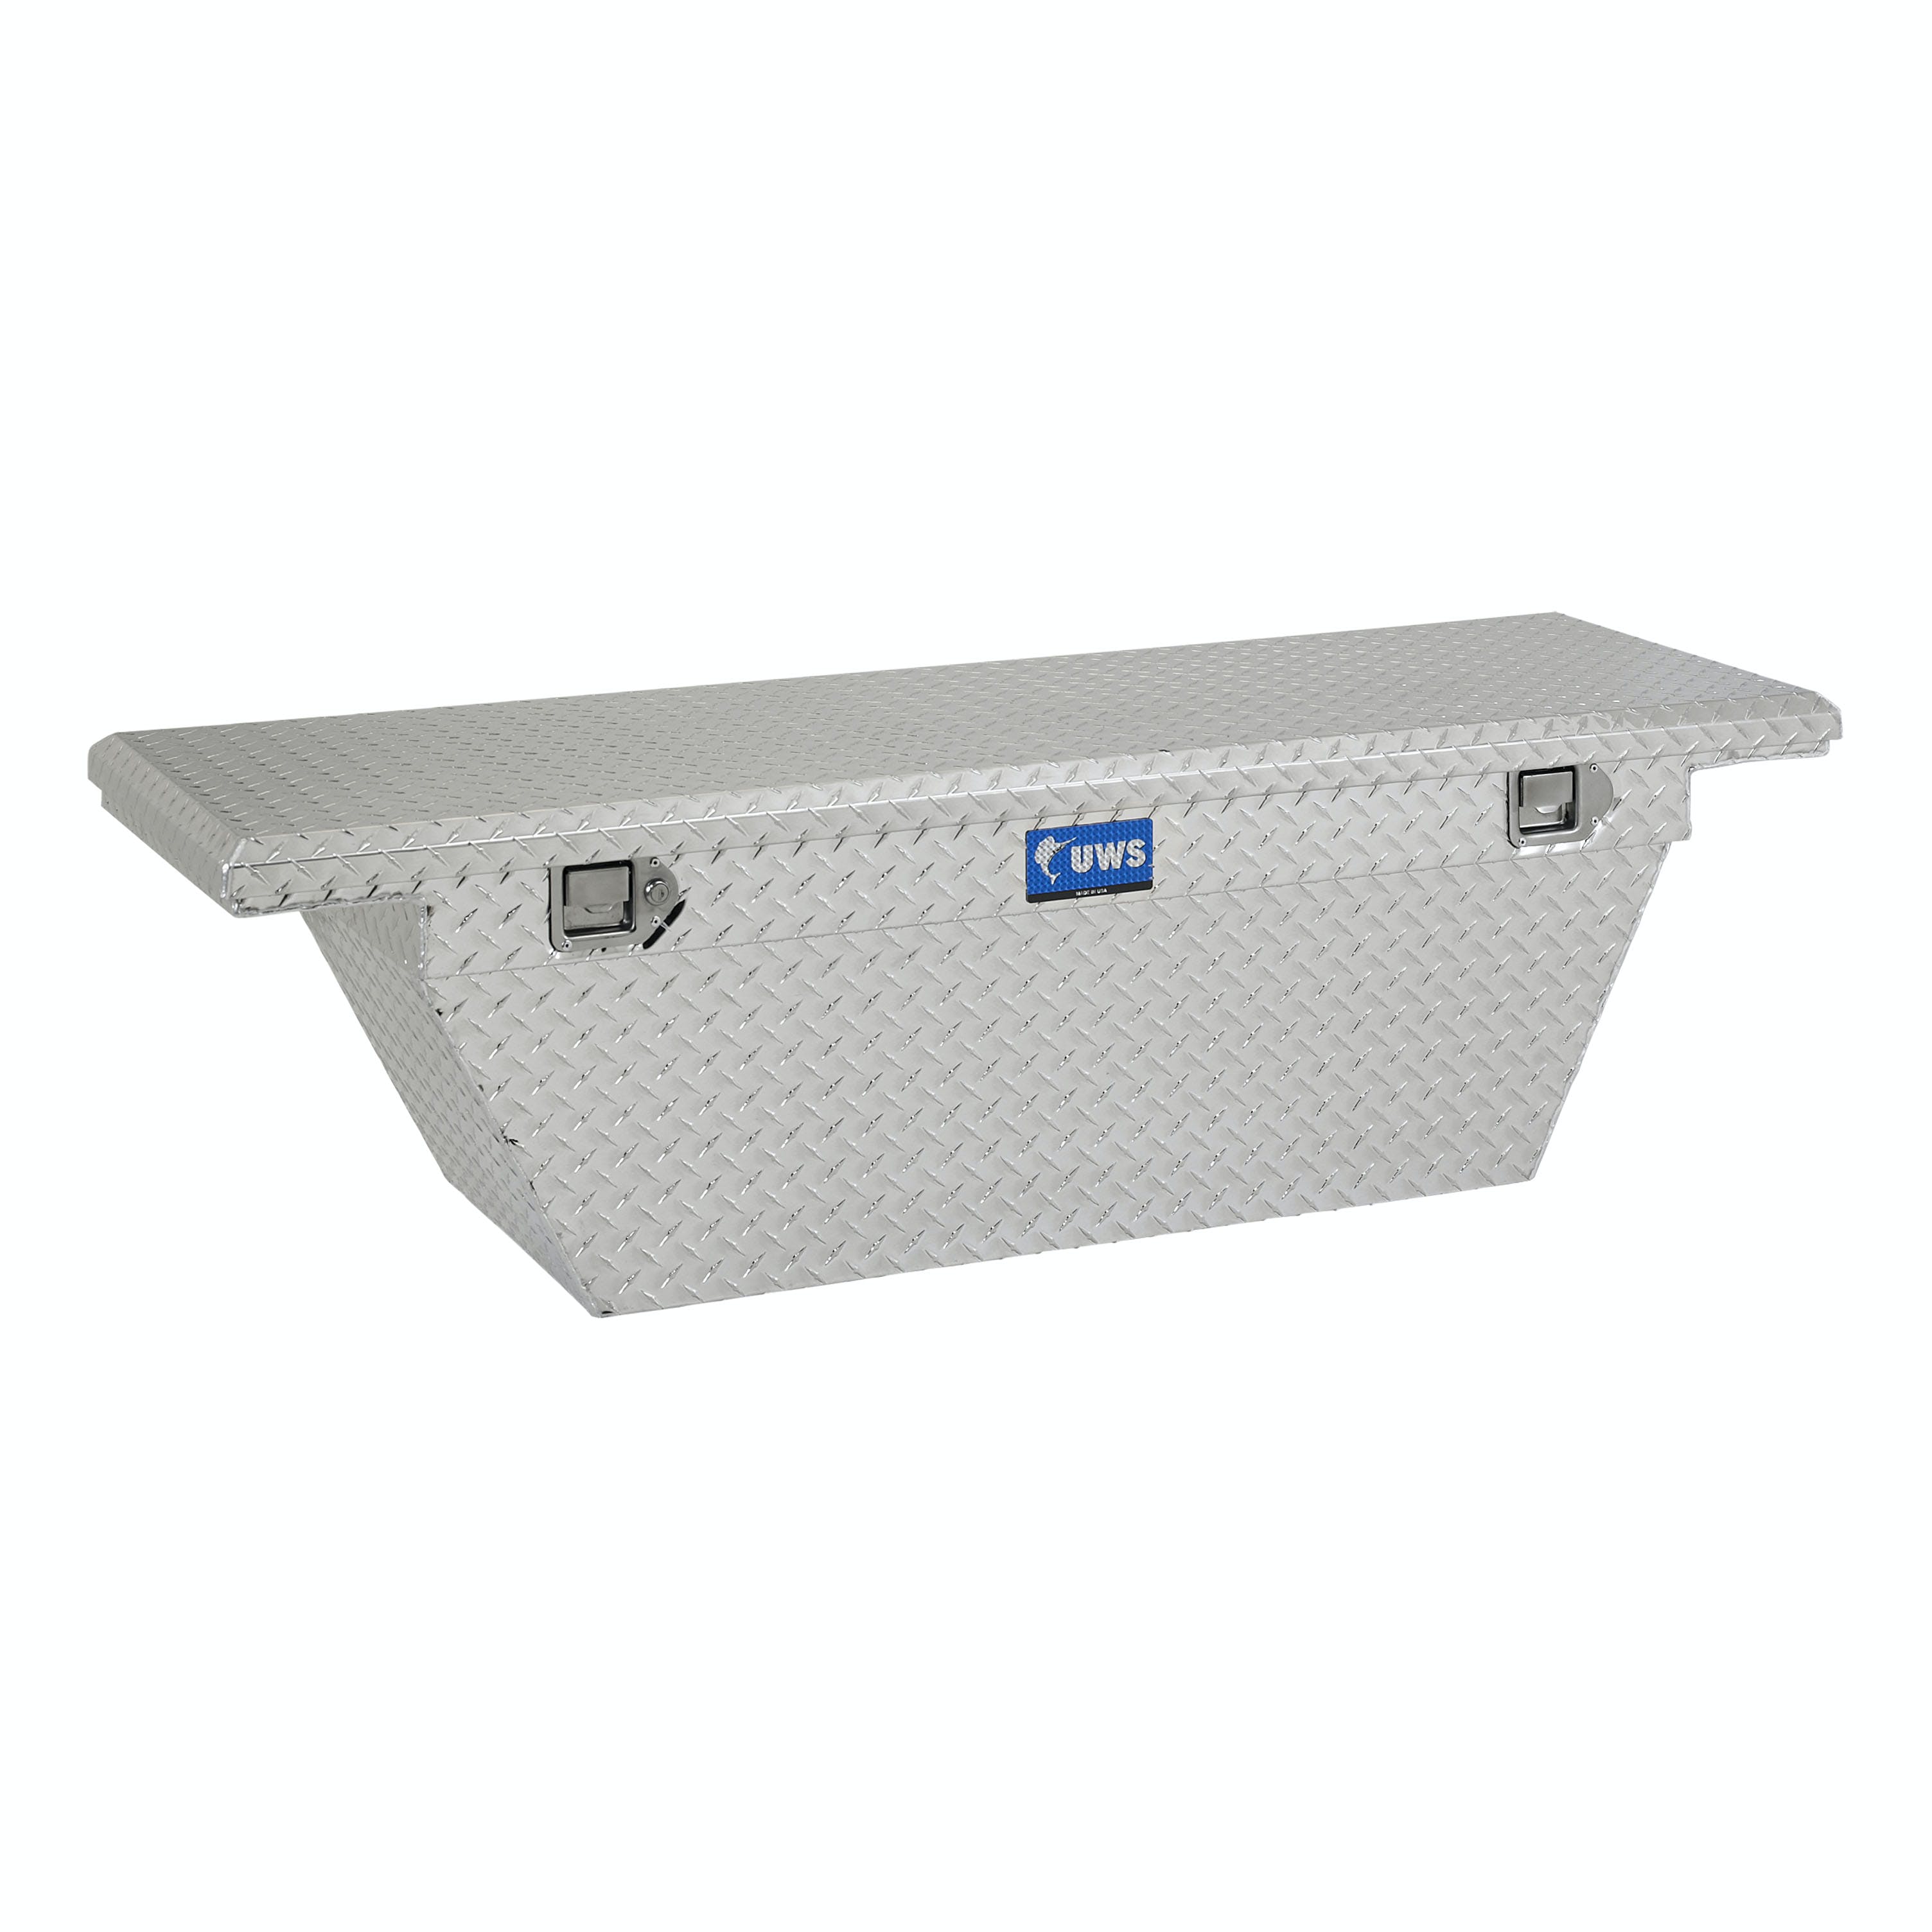 UWS TBSD-63A-LP 63 inch Aluminum Single Lid Crossover Toolbox Deep Angled Low Profile